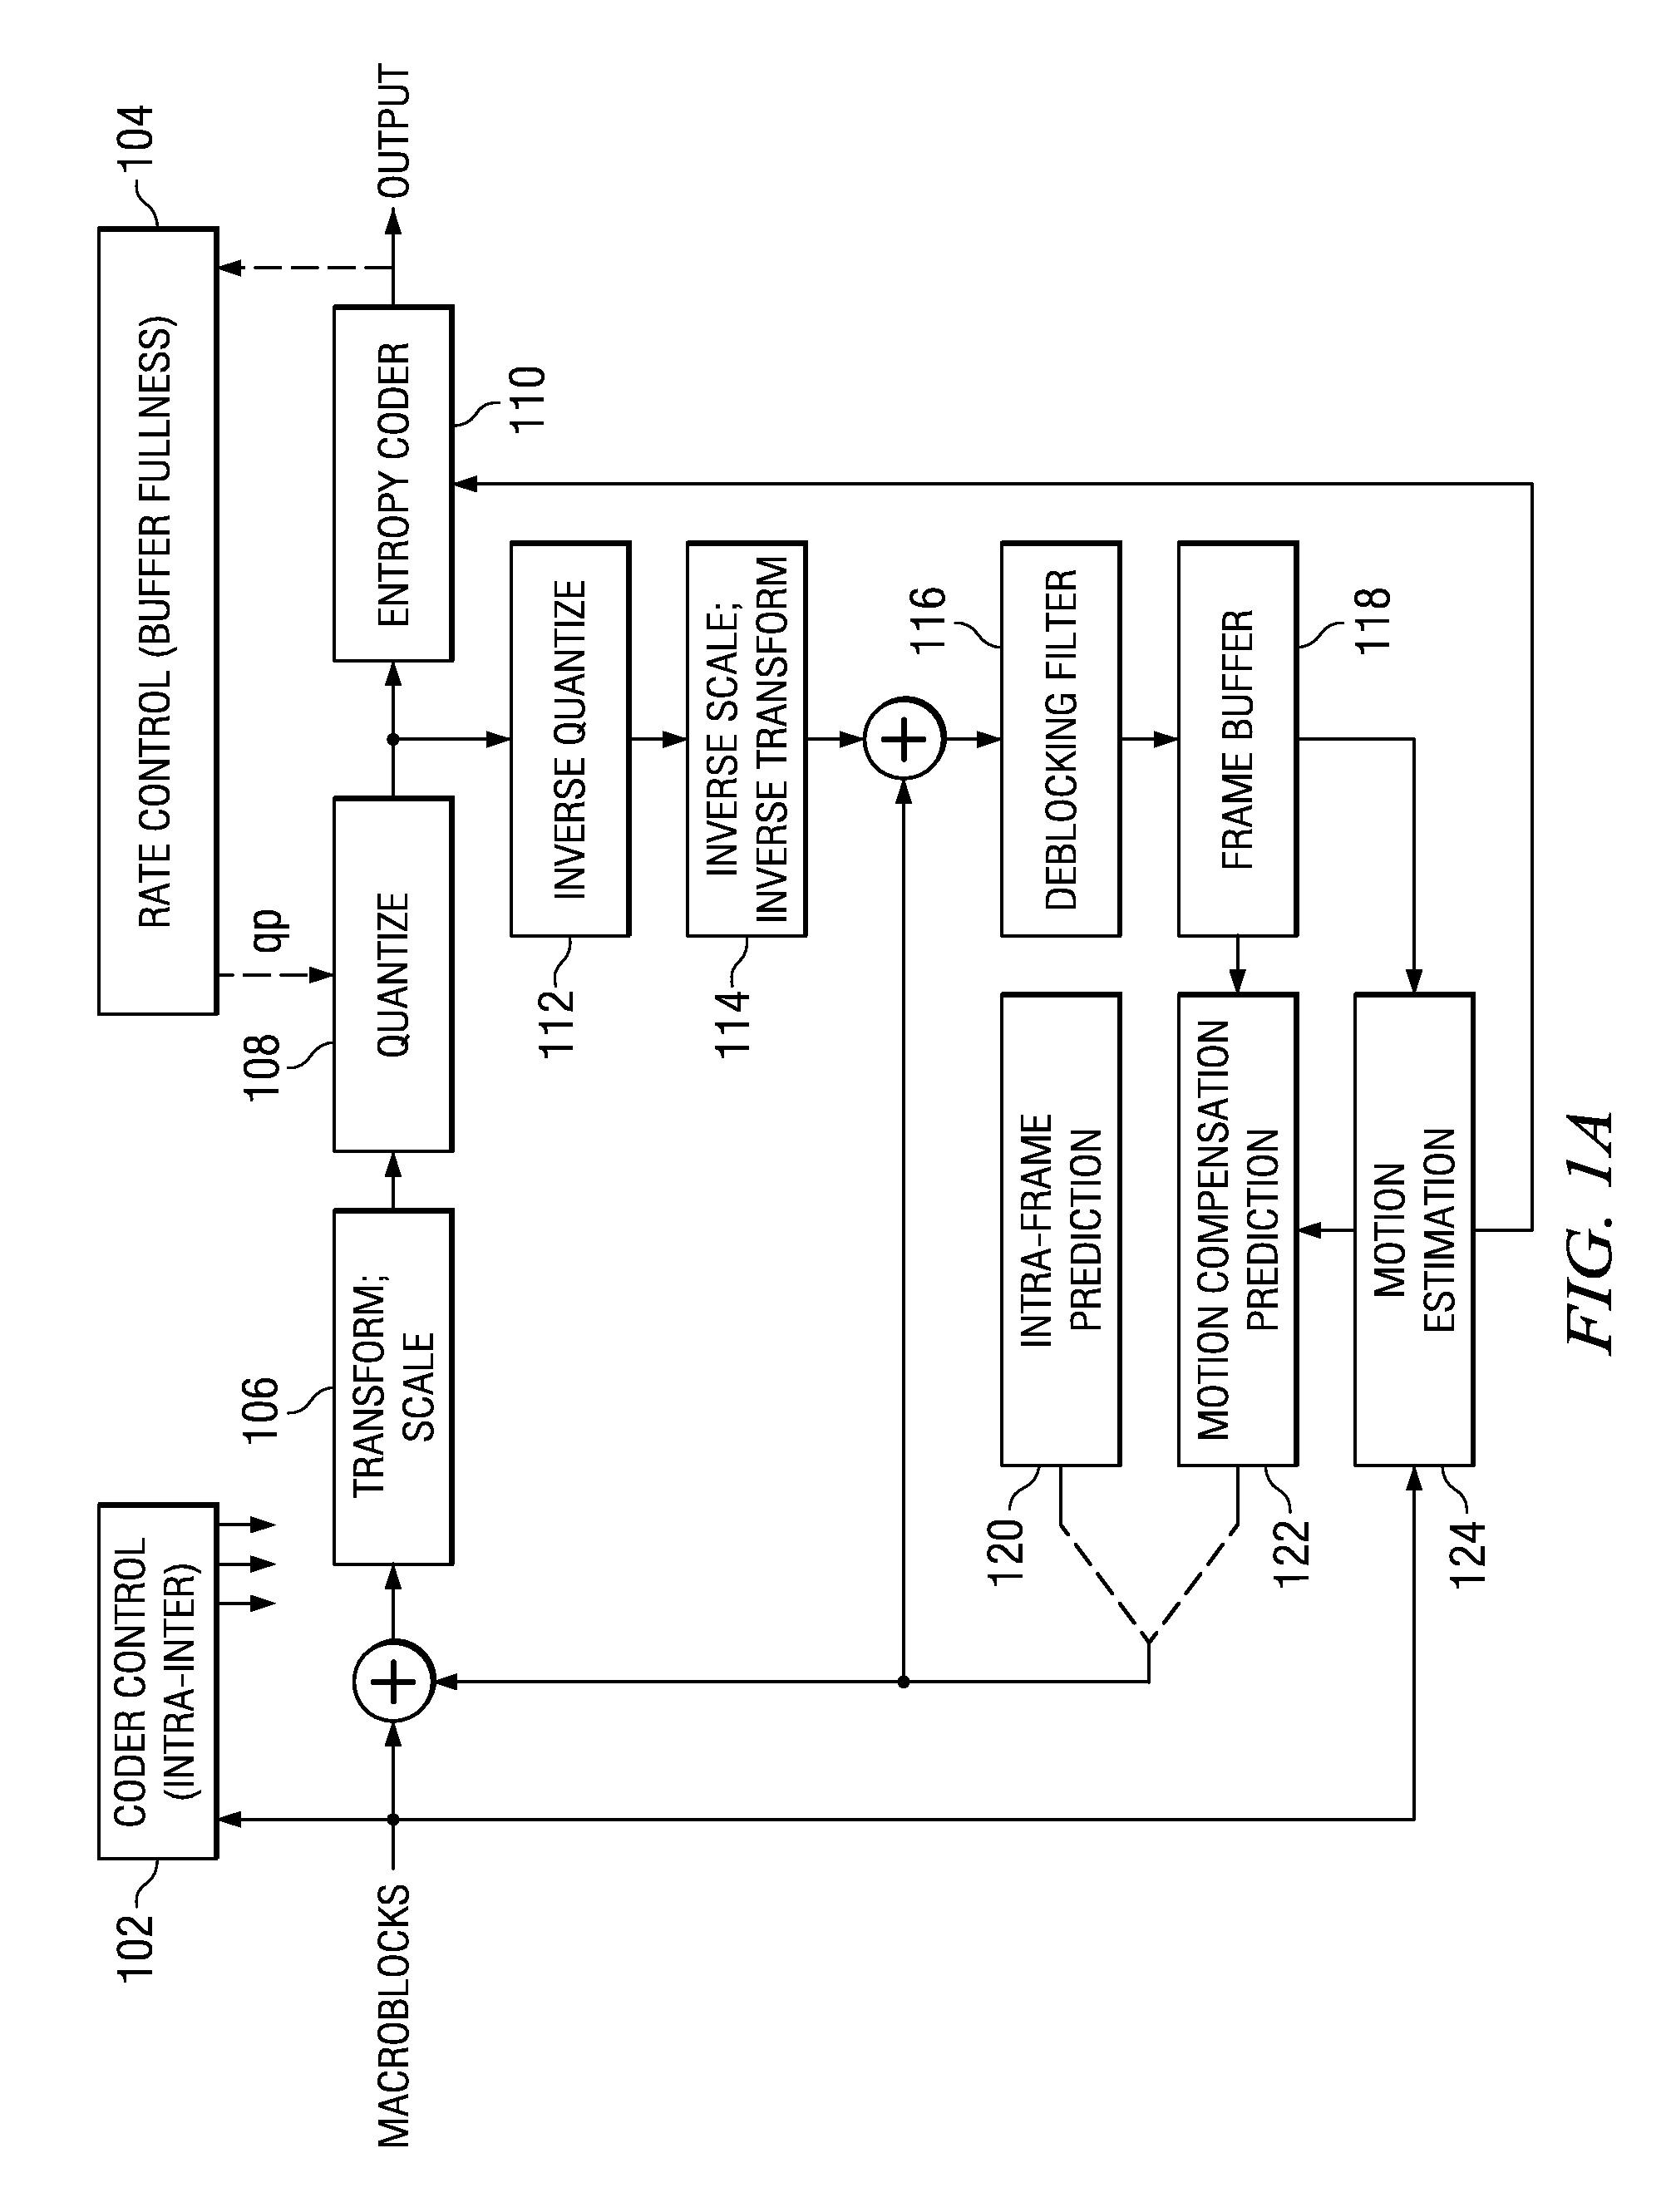 System and Method for Video Coding Having Reduced Computational Intensity